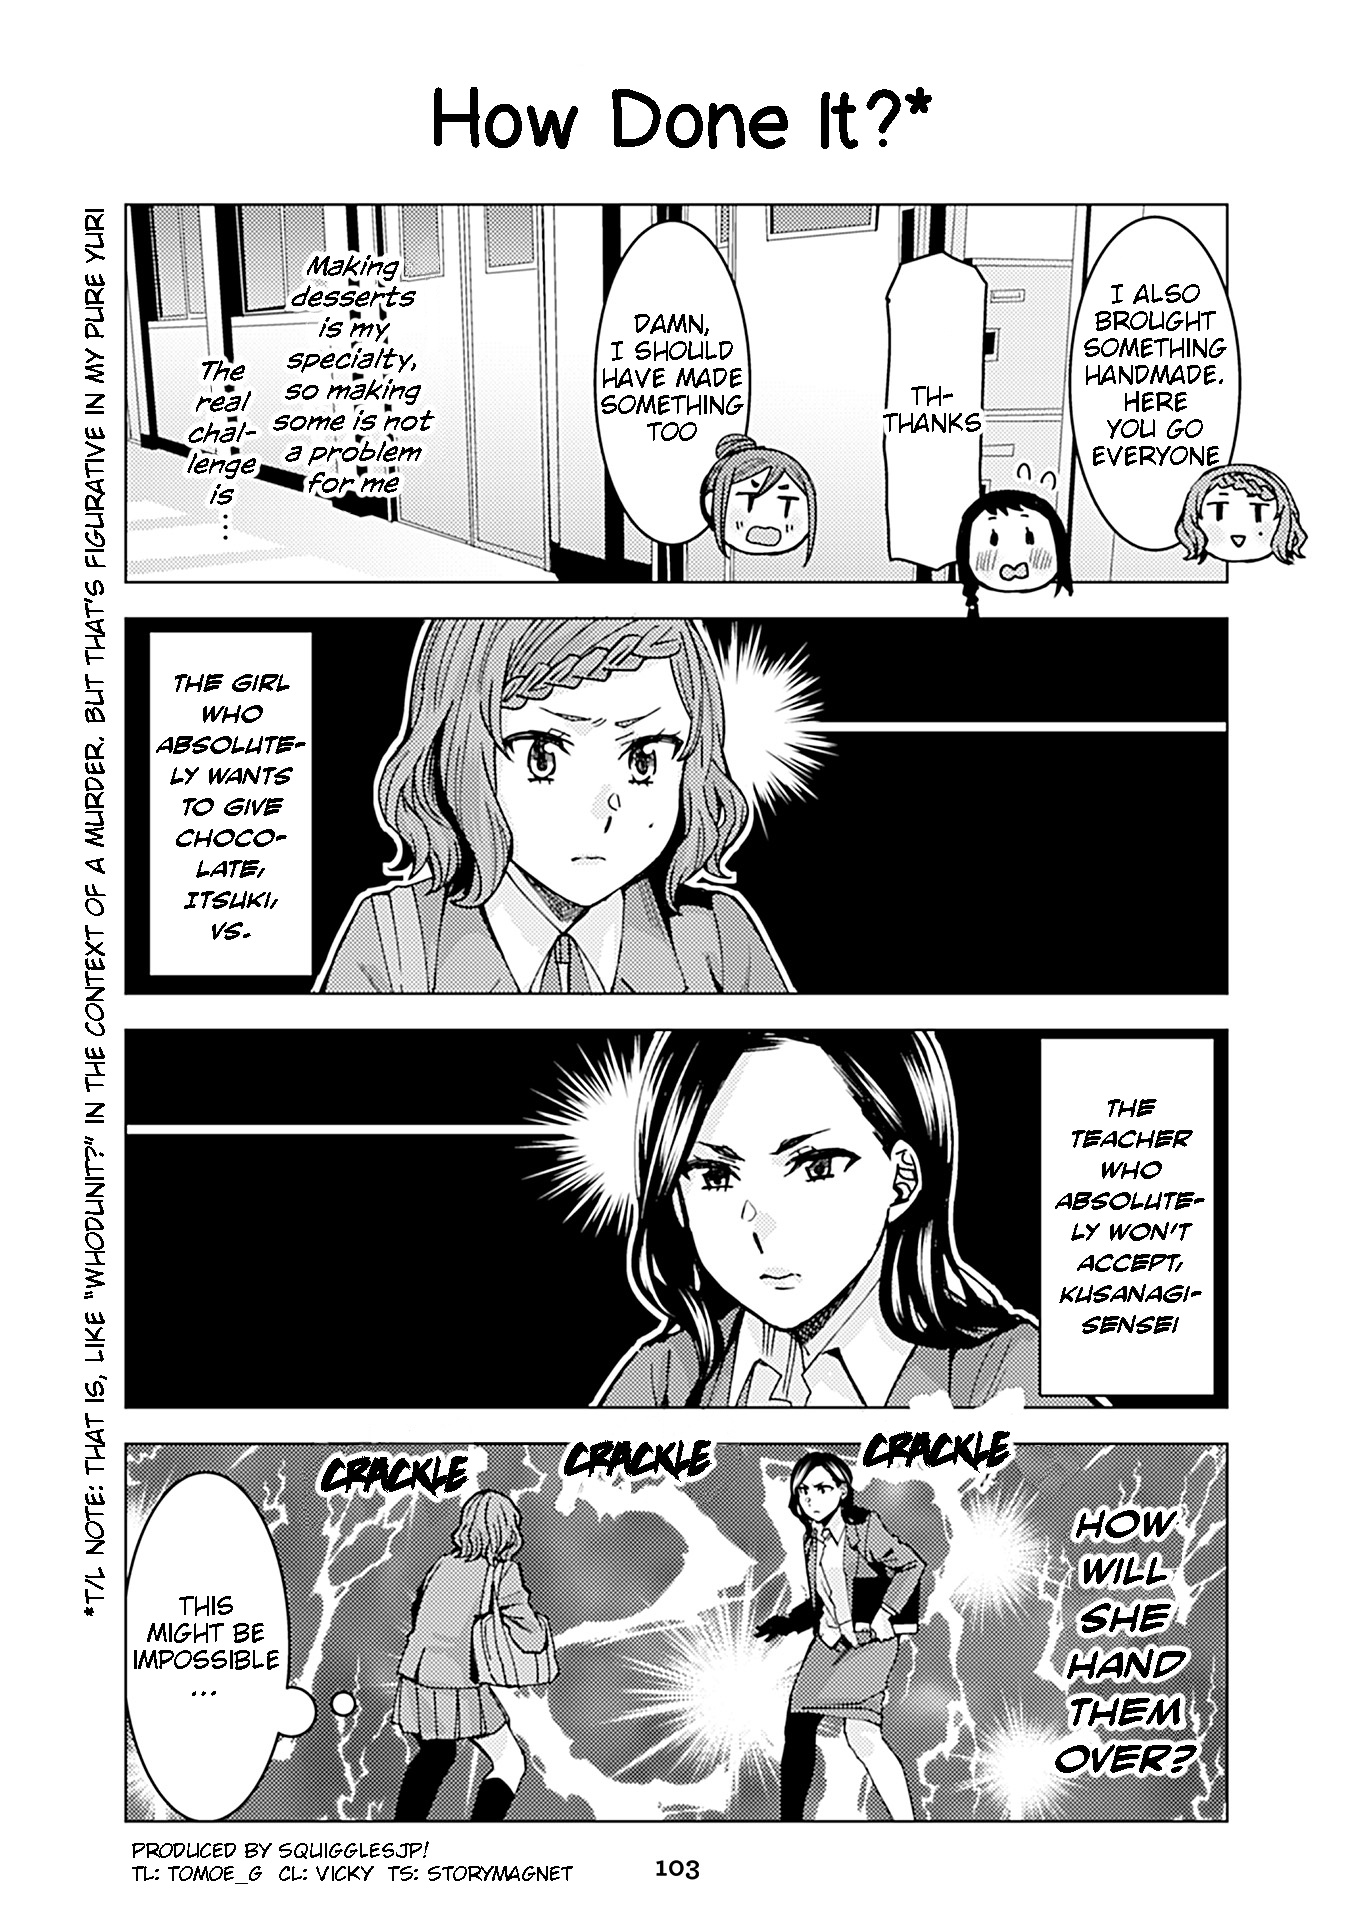 Kusanagi-Sensei Is Being Tested Vol.2 Chapter 209.18: How Done It?* - Picture 1